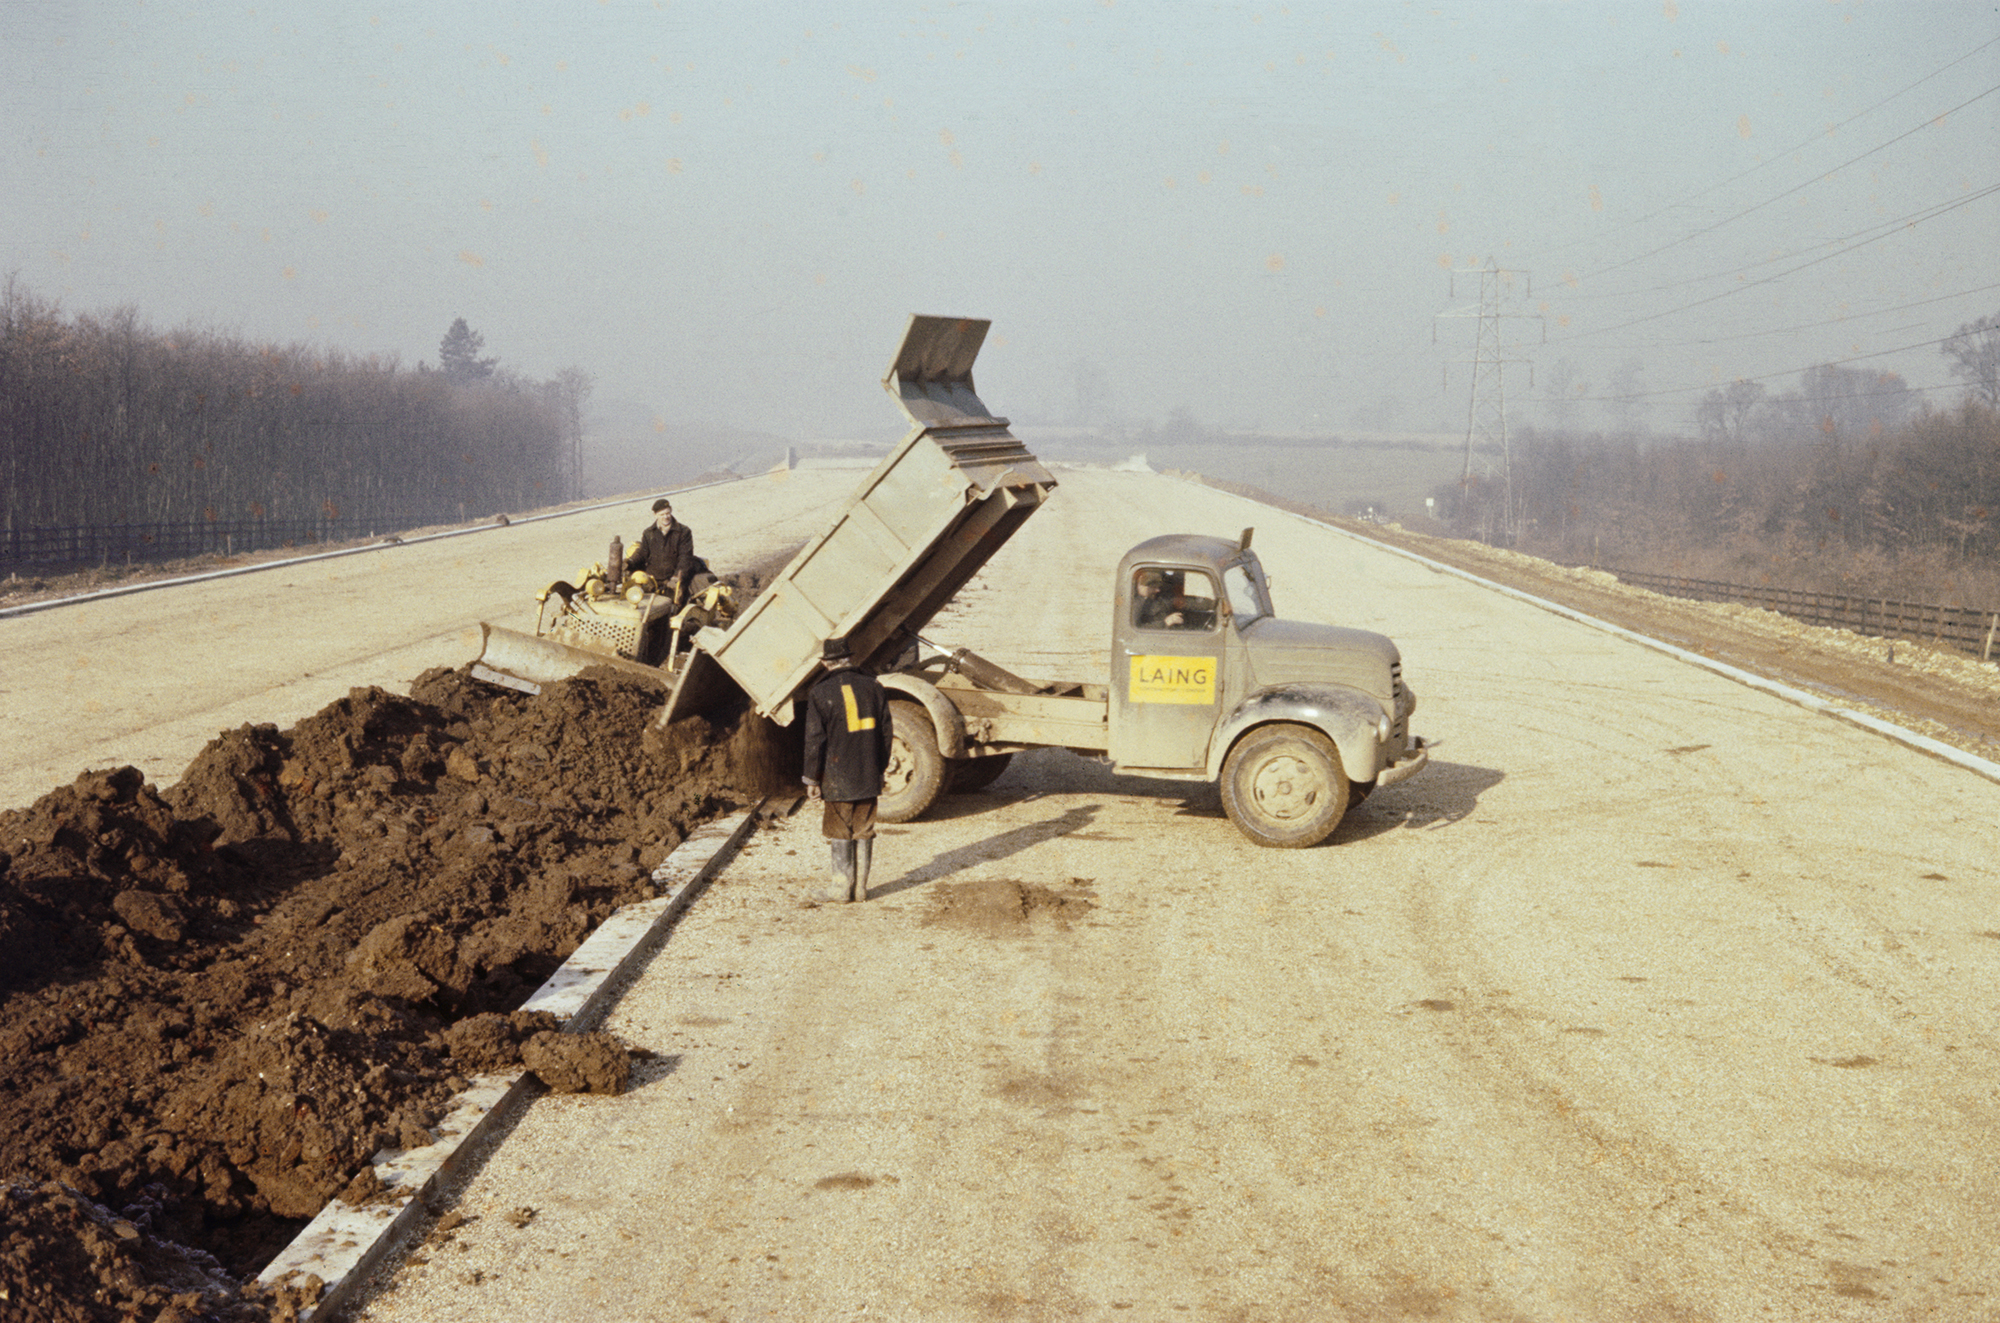 Earth being tipped into the central reservation of the M1 motorway by dumper truck.